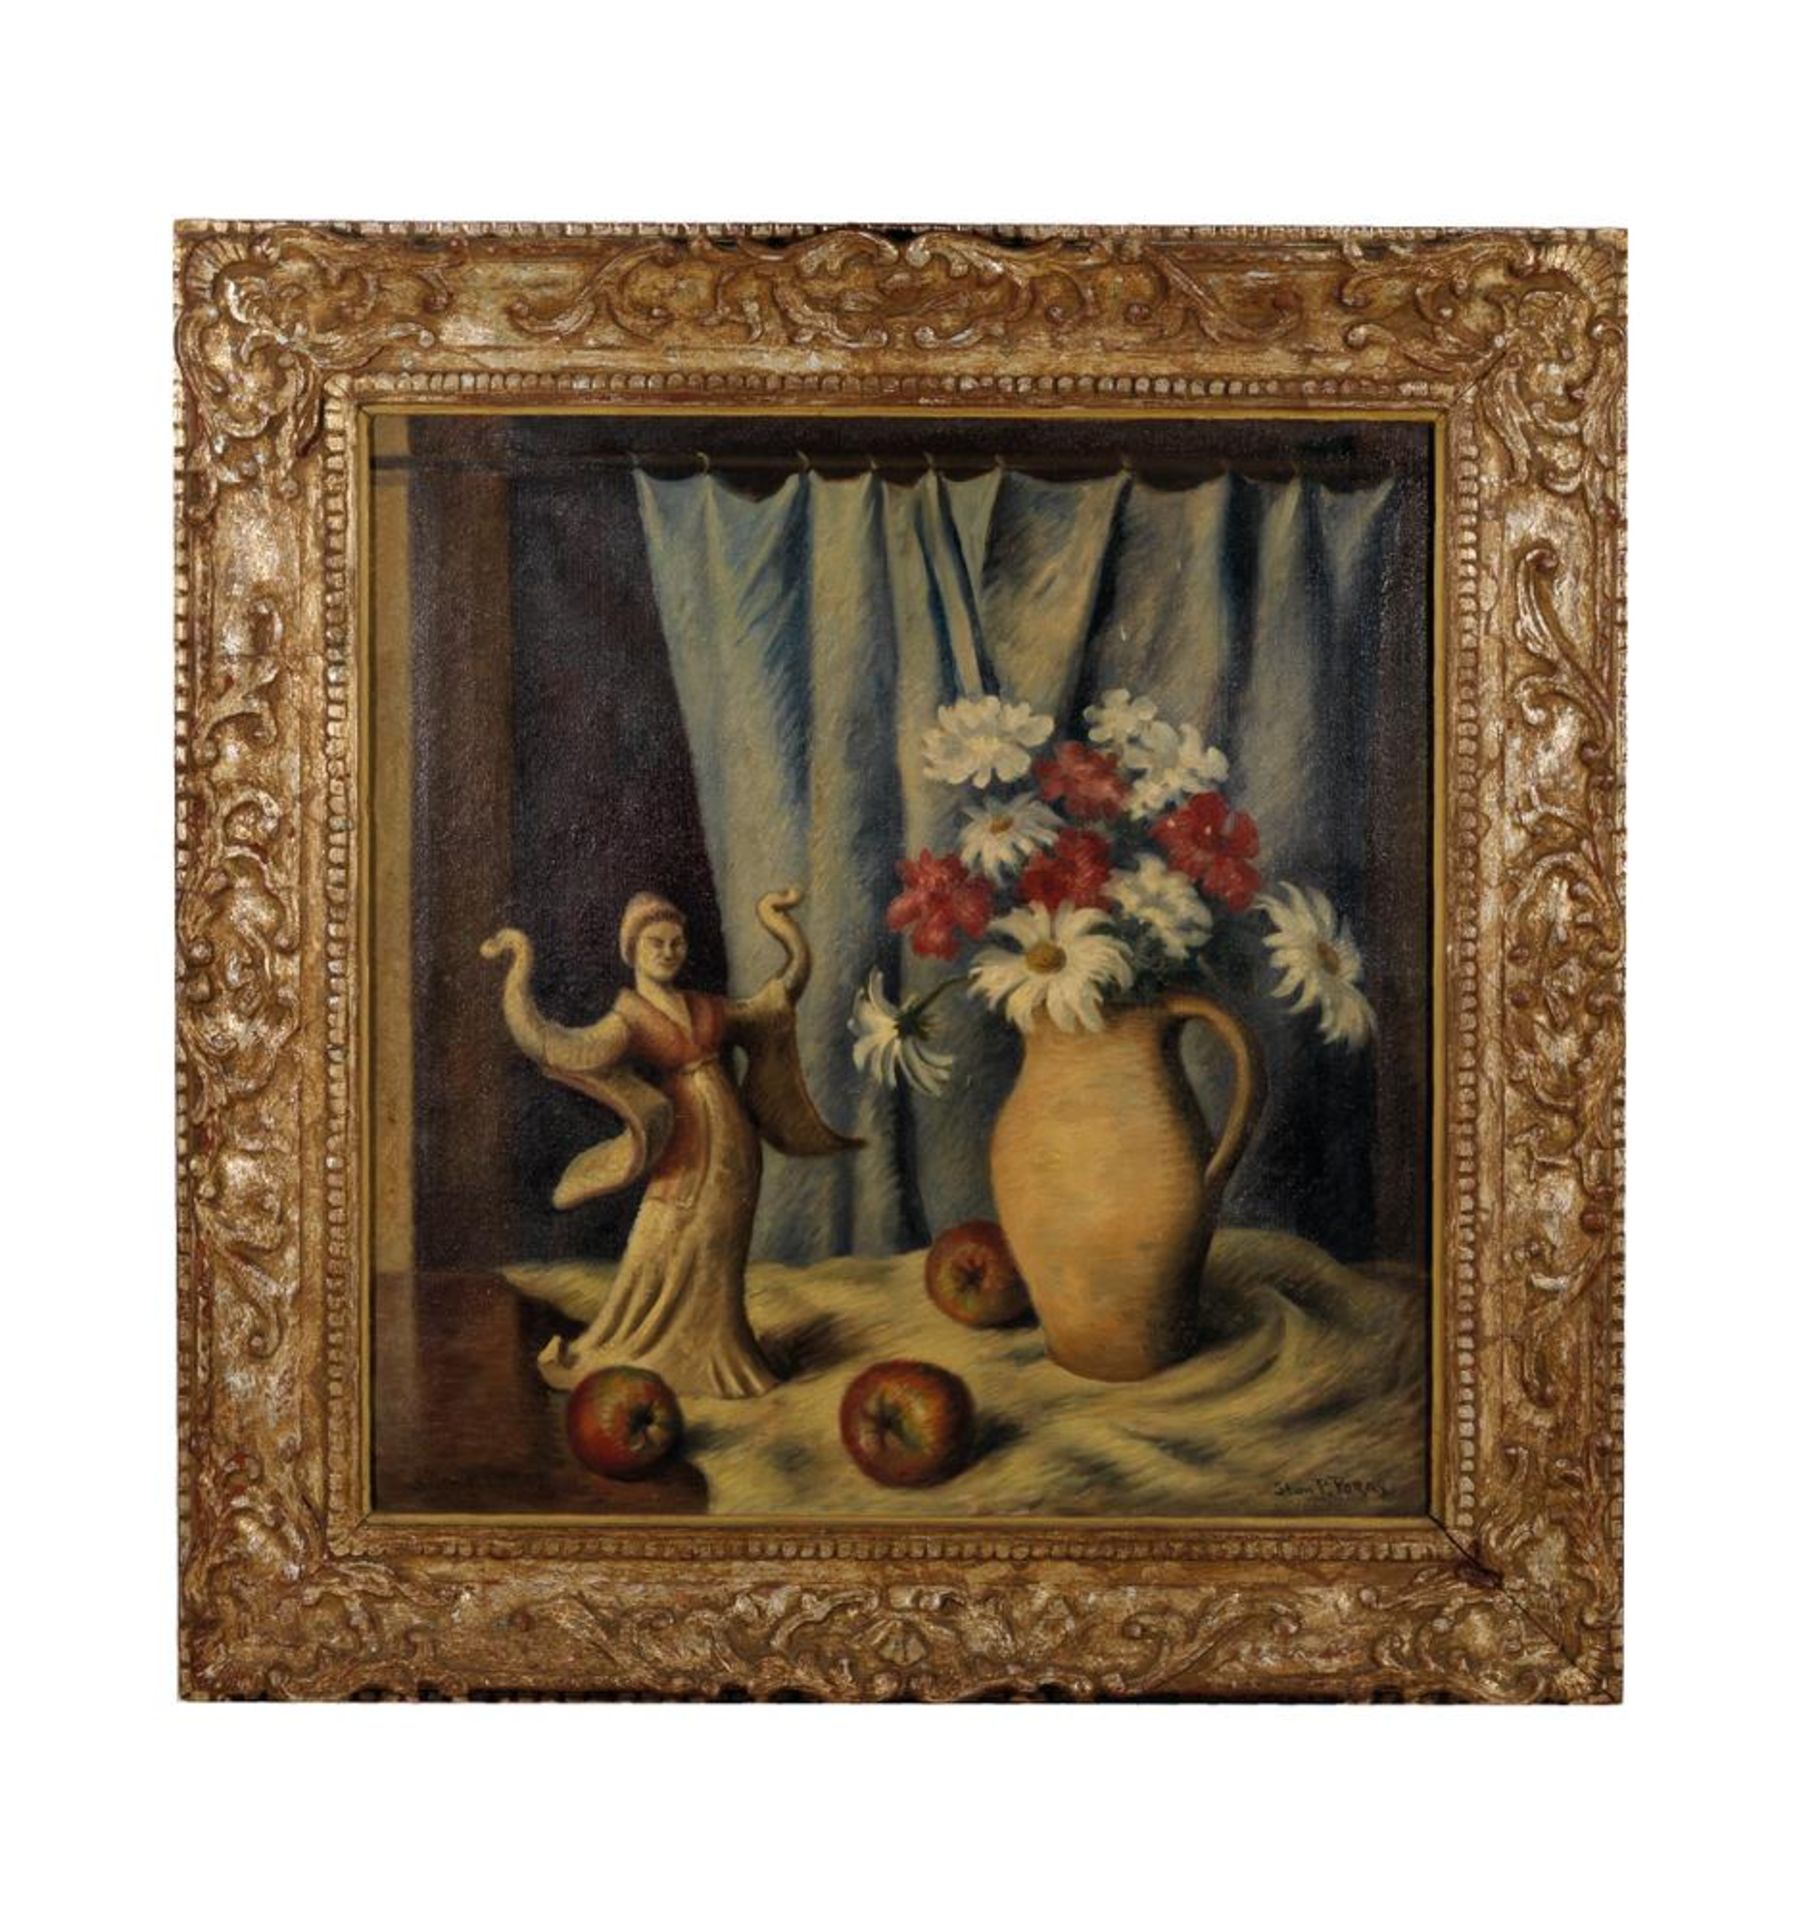 STAN PORAY (1888-1948) - Still life with Oriental figure Signed ‘Stan P. Poray’ [...] - Image 2 of 2